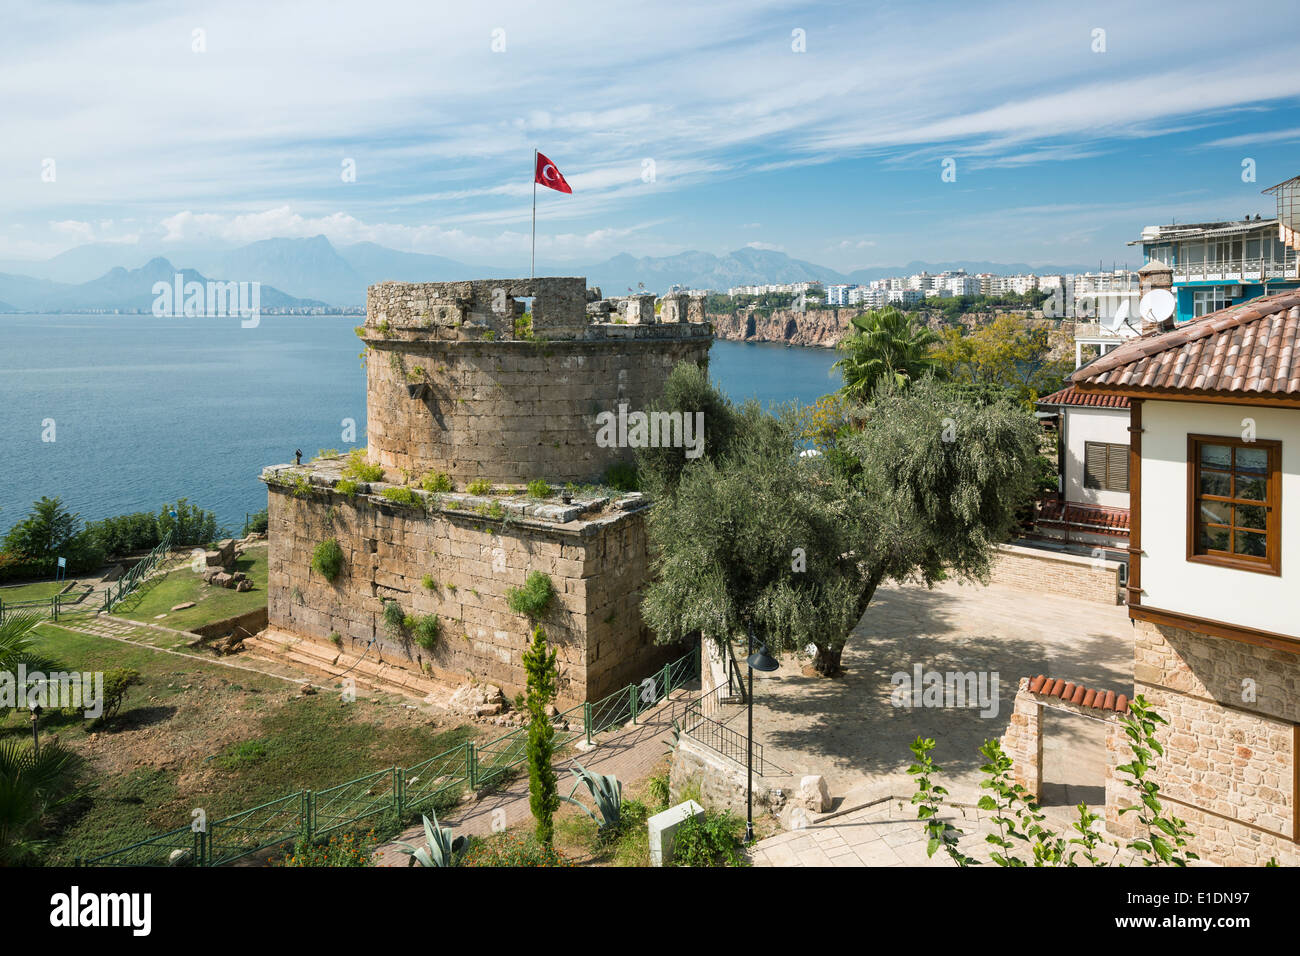 Ancient Castle Tower in old town Kaleici, Antalya. View on antalyan bay, sea and Antalya city. Stock Photo